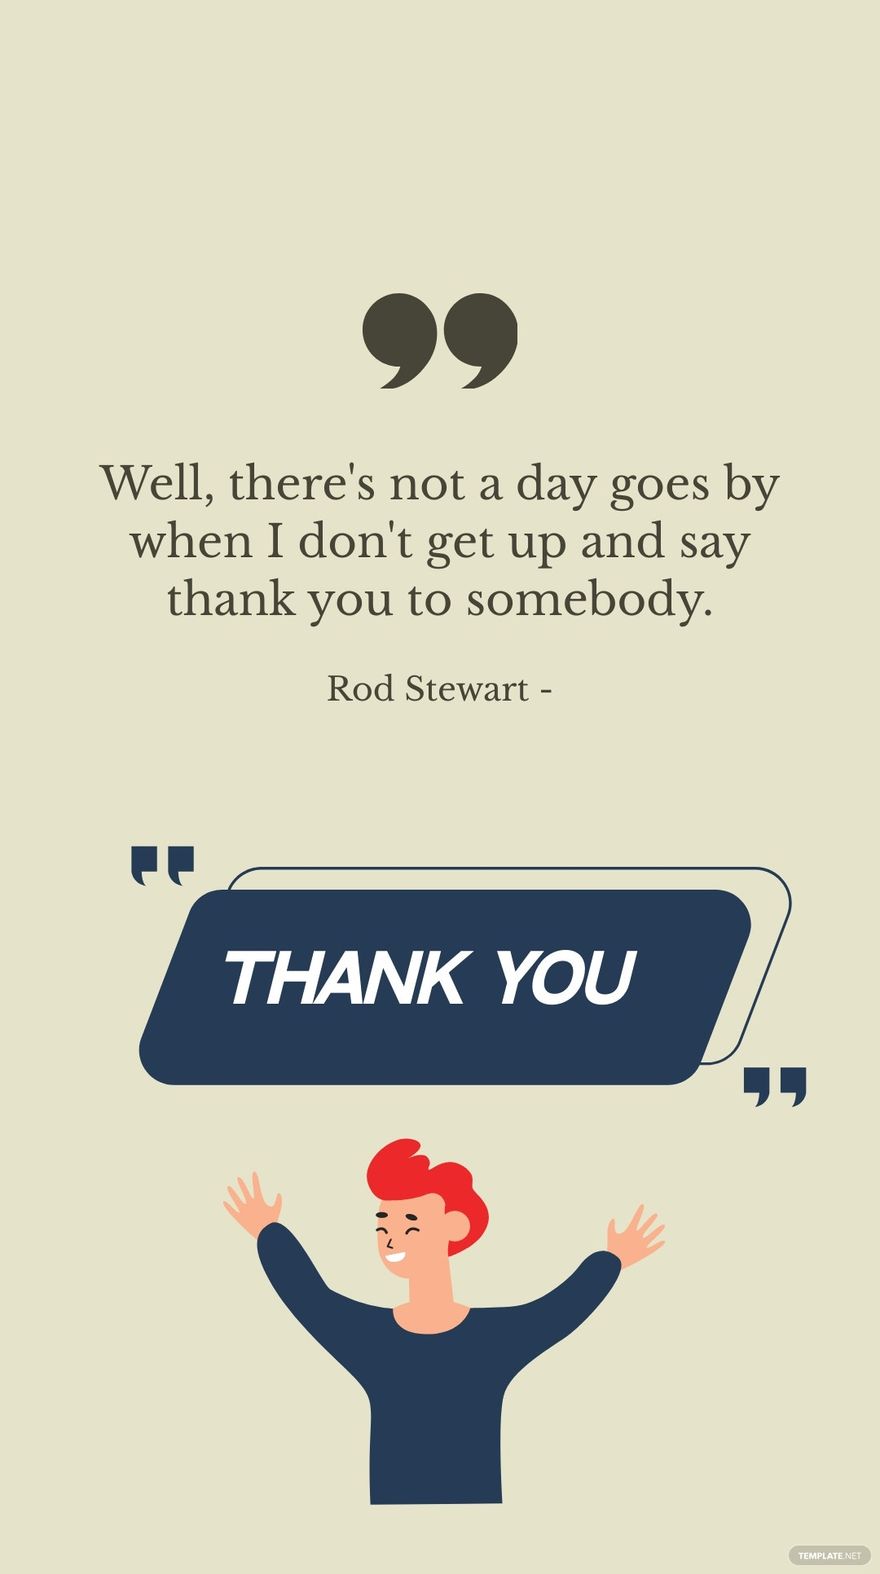 Rod Stewart - Well, there's not a day goes by when I don't get up and say thank you to somebody. in JPG